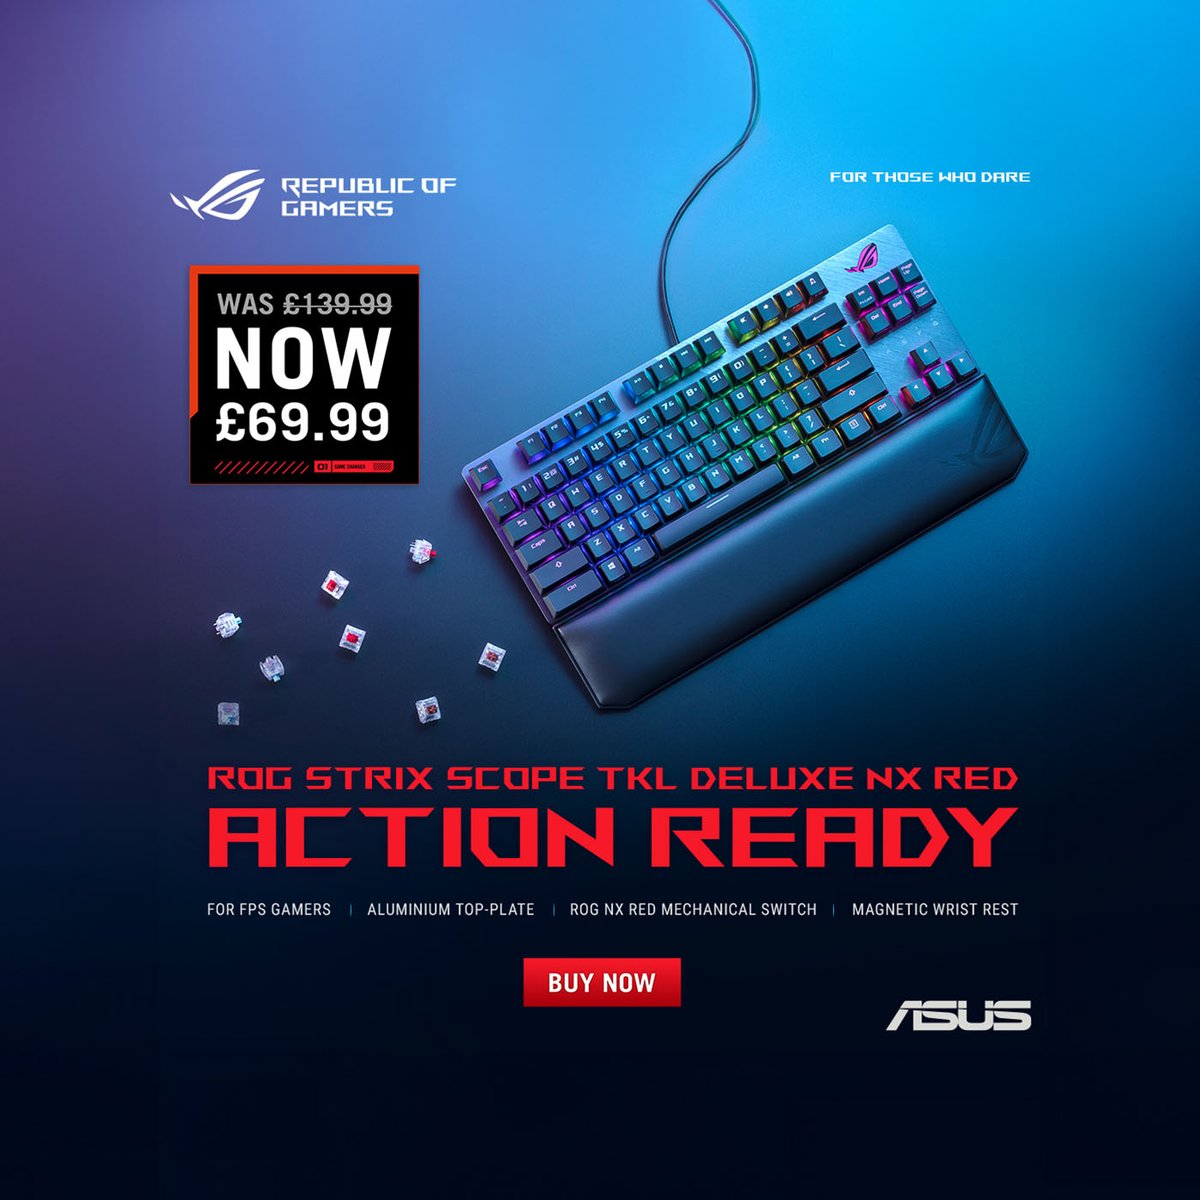 Get ready for action with this incredible deal! 50% OFF the ASUS ROG STRIX SCOPE TKL DELUXE NX Red Mechanical Keyboard! 😱 🔥 SHOP NOW > tinyurl.com/2rsk2ppe @ASUS_ROGUK #gaminggear #custompcbuild #explore #gamerpc #gamingsetup #gamergirl #gamingpc #pcgaming #gaming #asus